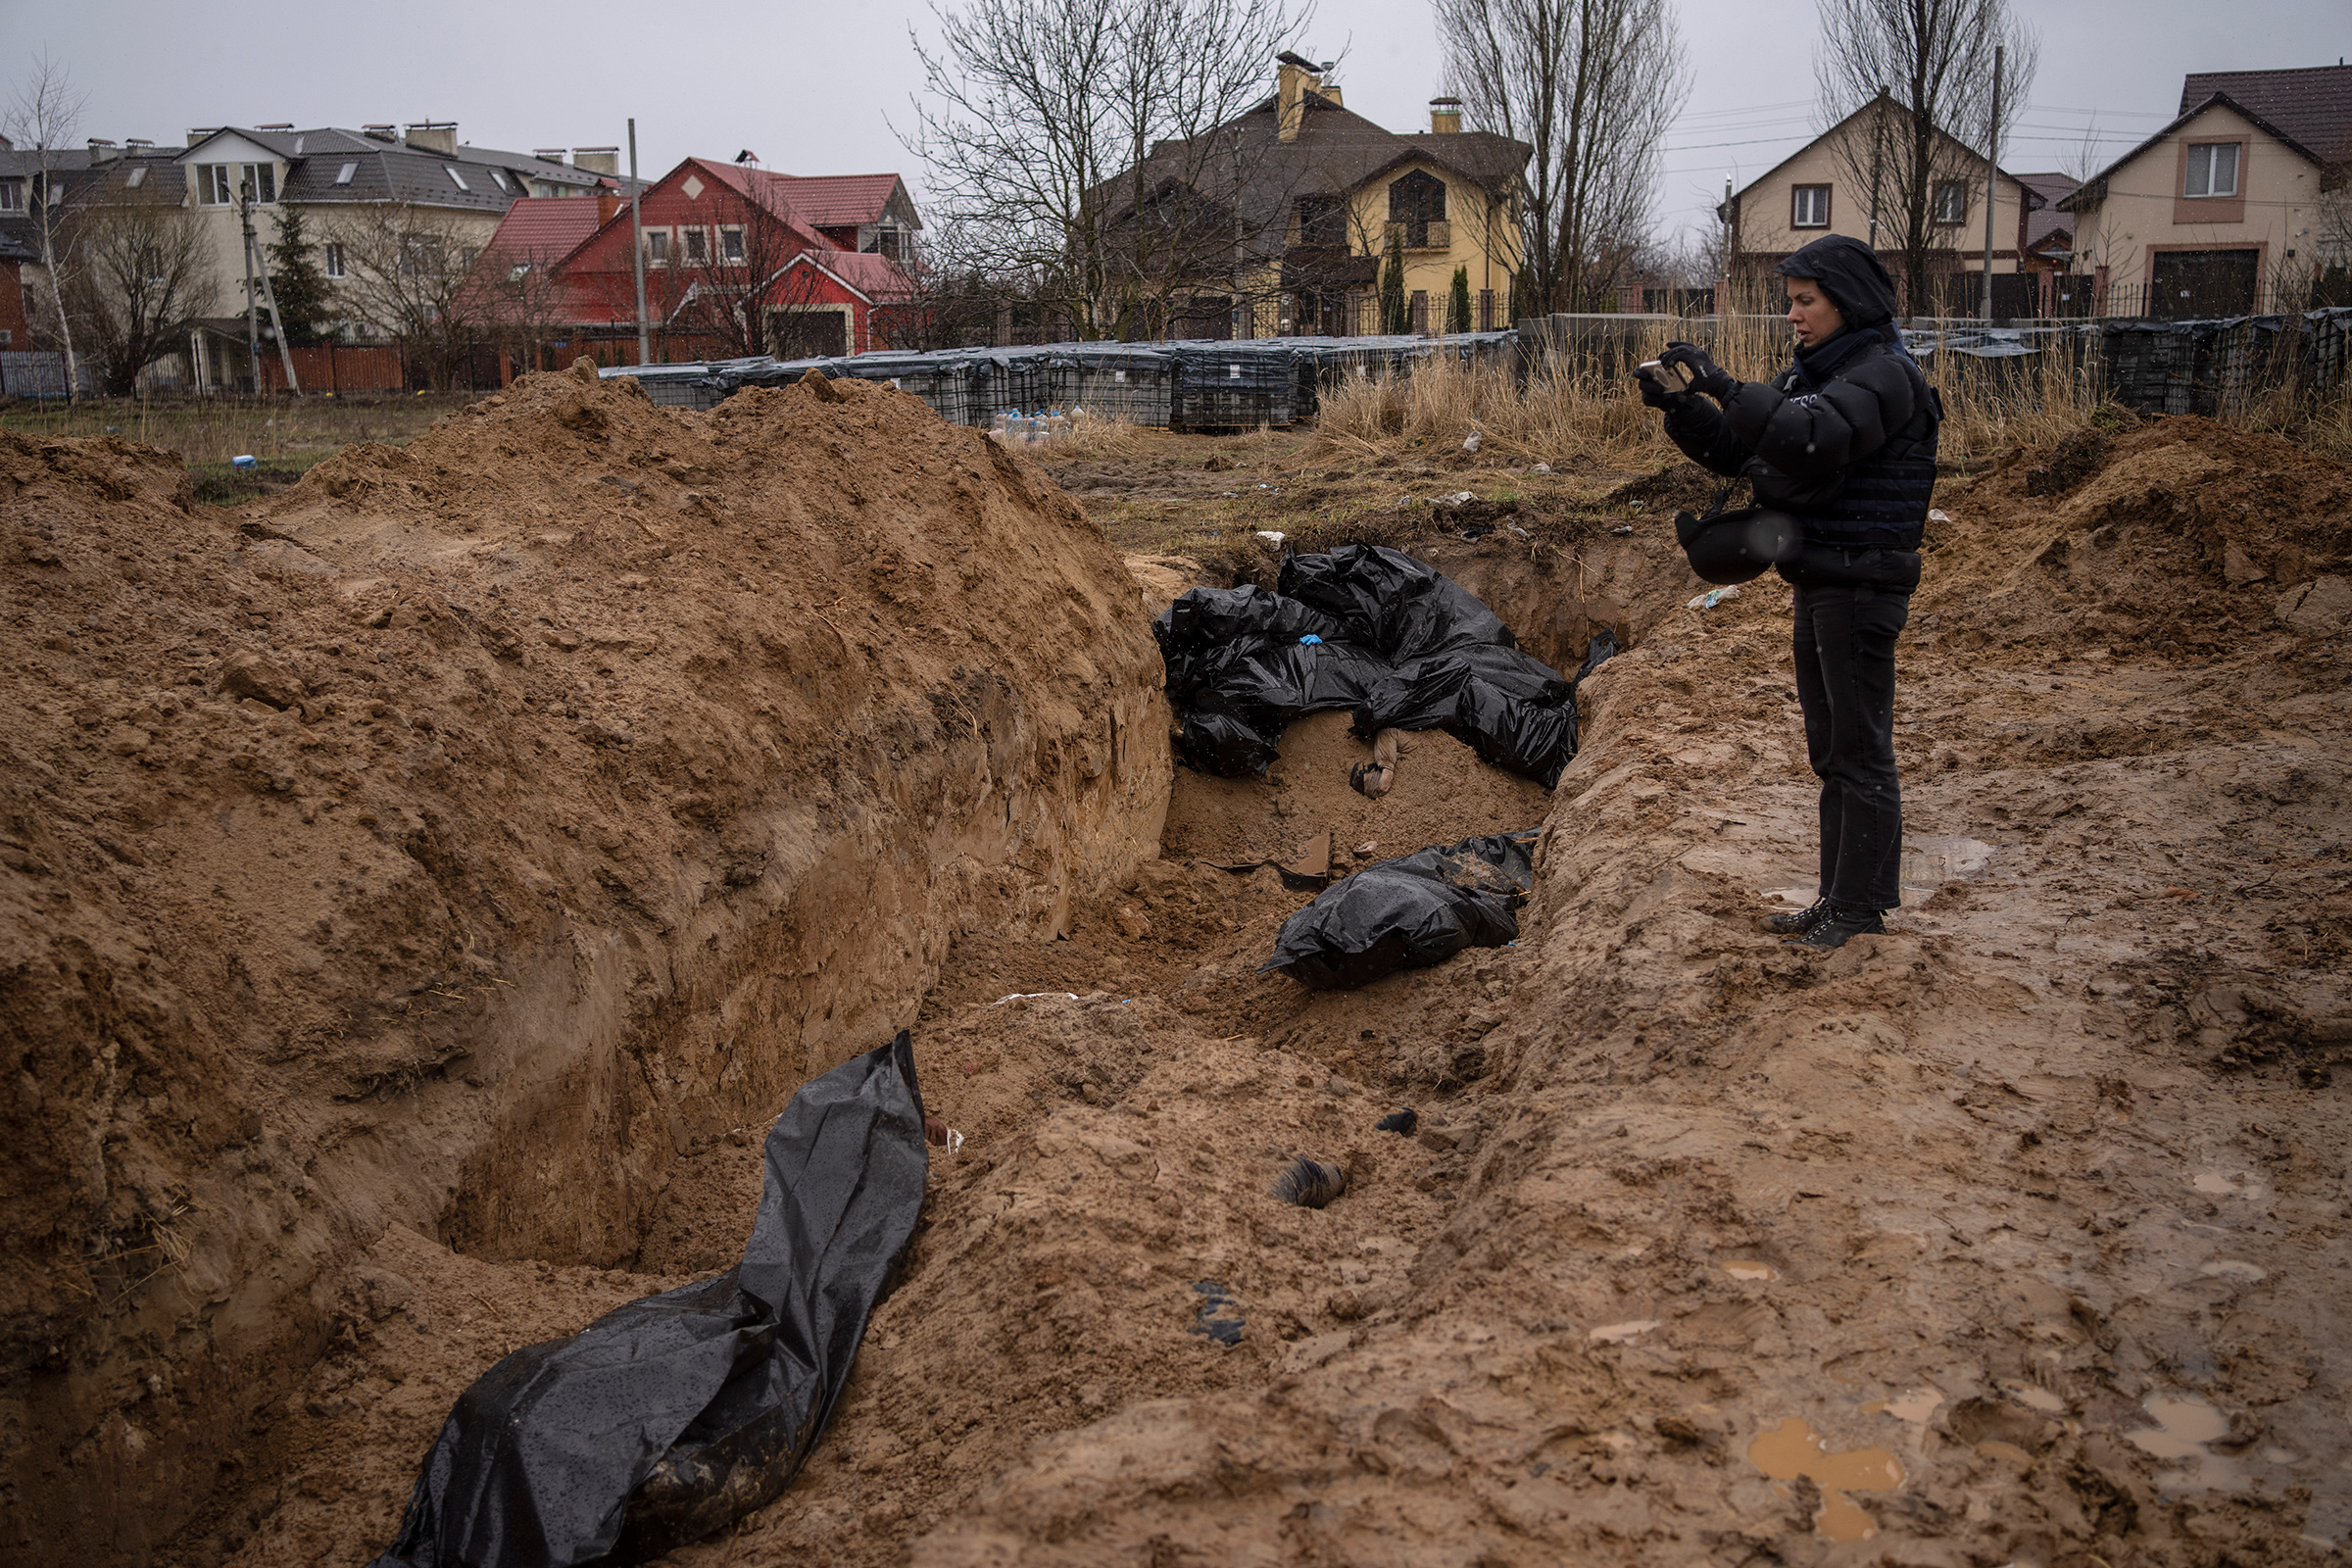 A journalist takes video of a mass grave in Bucha, on the outskirts of Kyiv, Ukraine, Sunday, April 3, 2022. Ukrainian leaders have encouraged journalists to document what is happening in the country. (Rodrigo Abd—AP)